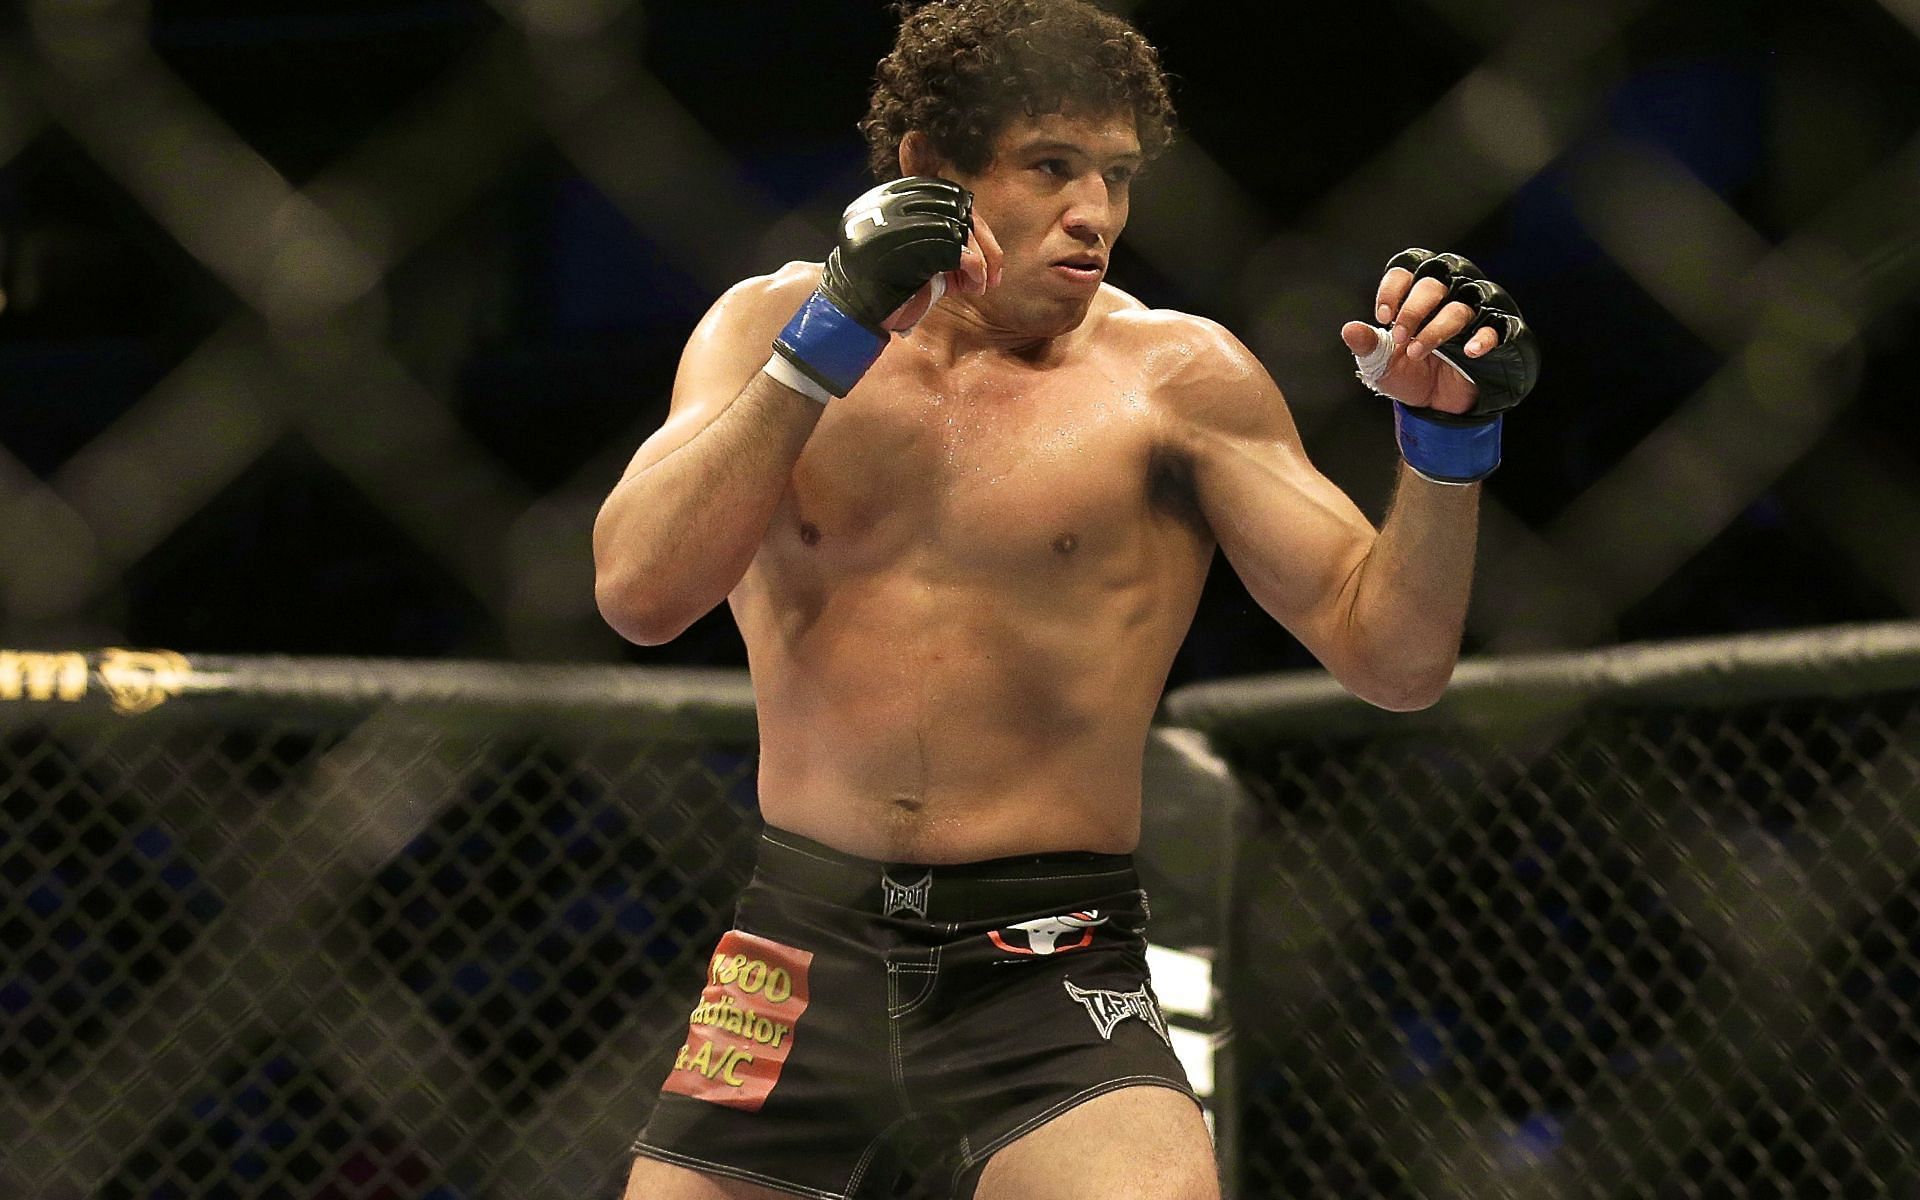 Gilbert Melendez debuted in the octagon with a title shot